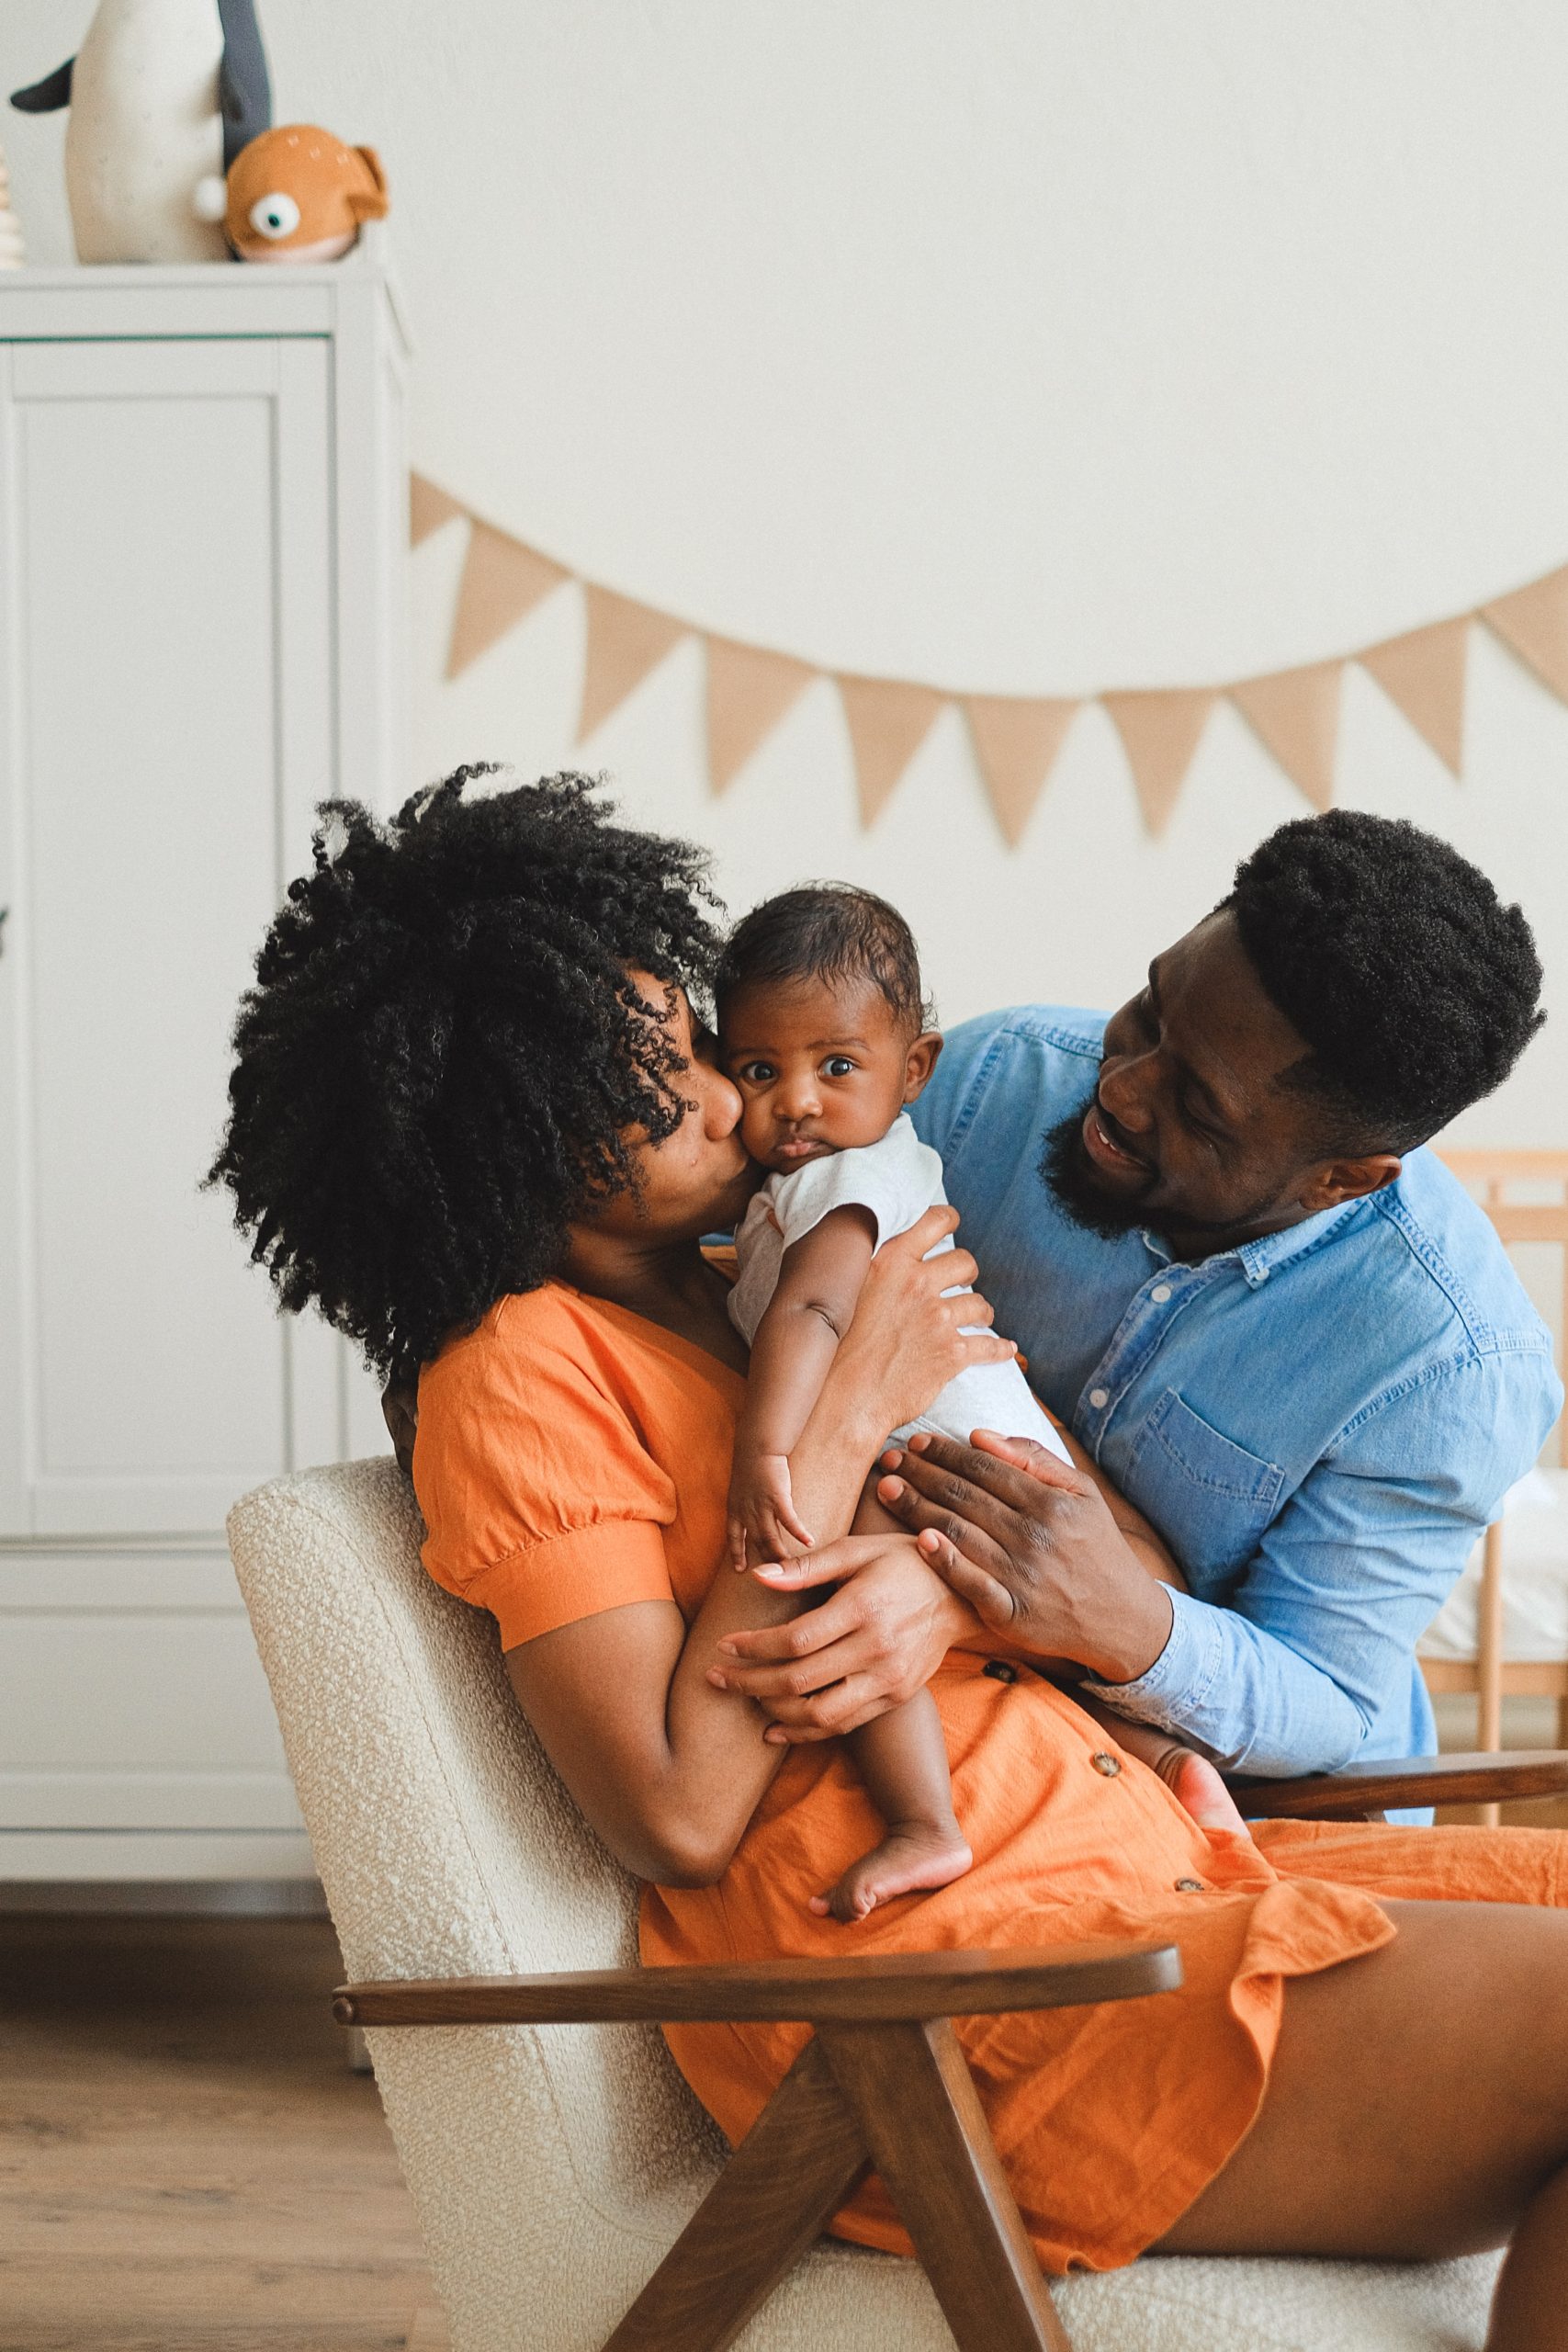 black-woman-wearing-an-orange-dress-sitting-on-a-chair-with-a-black-baby-and-her-husband